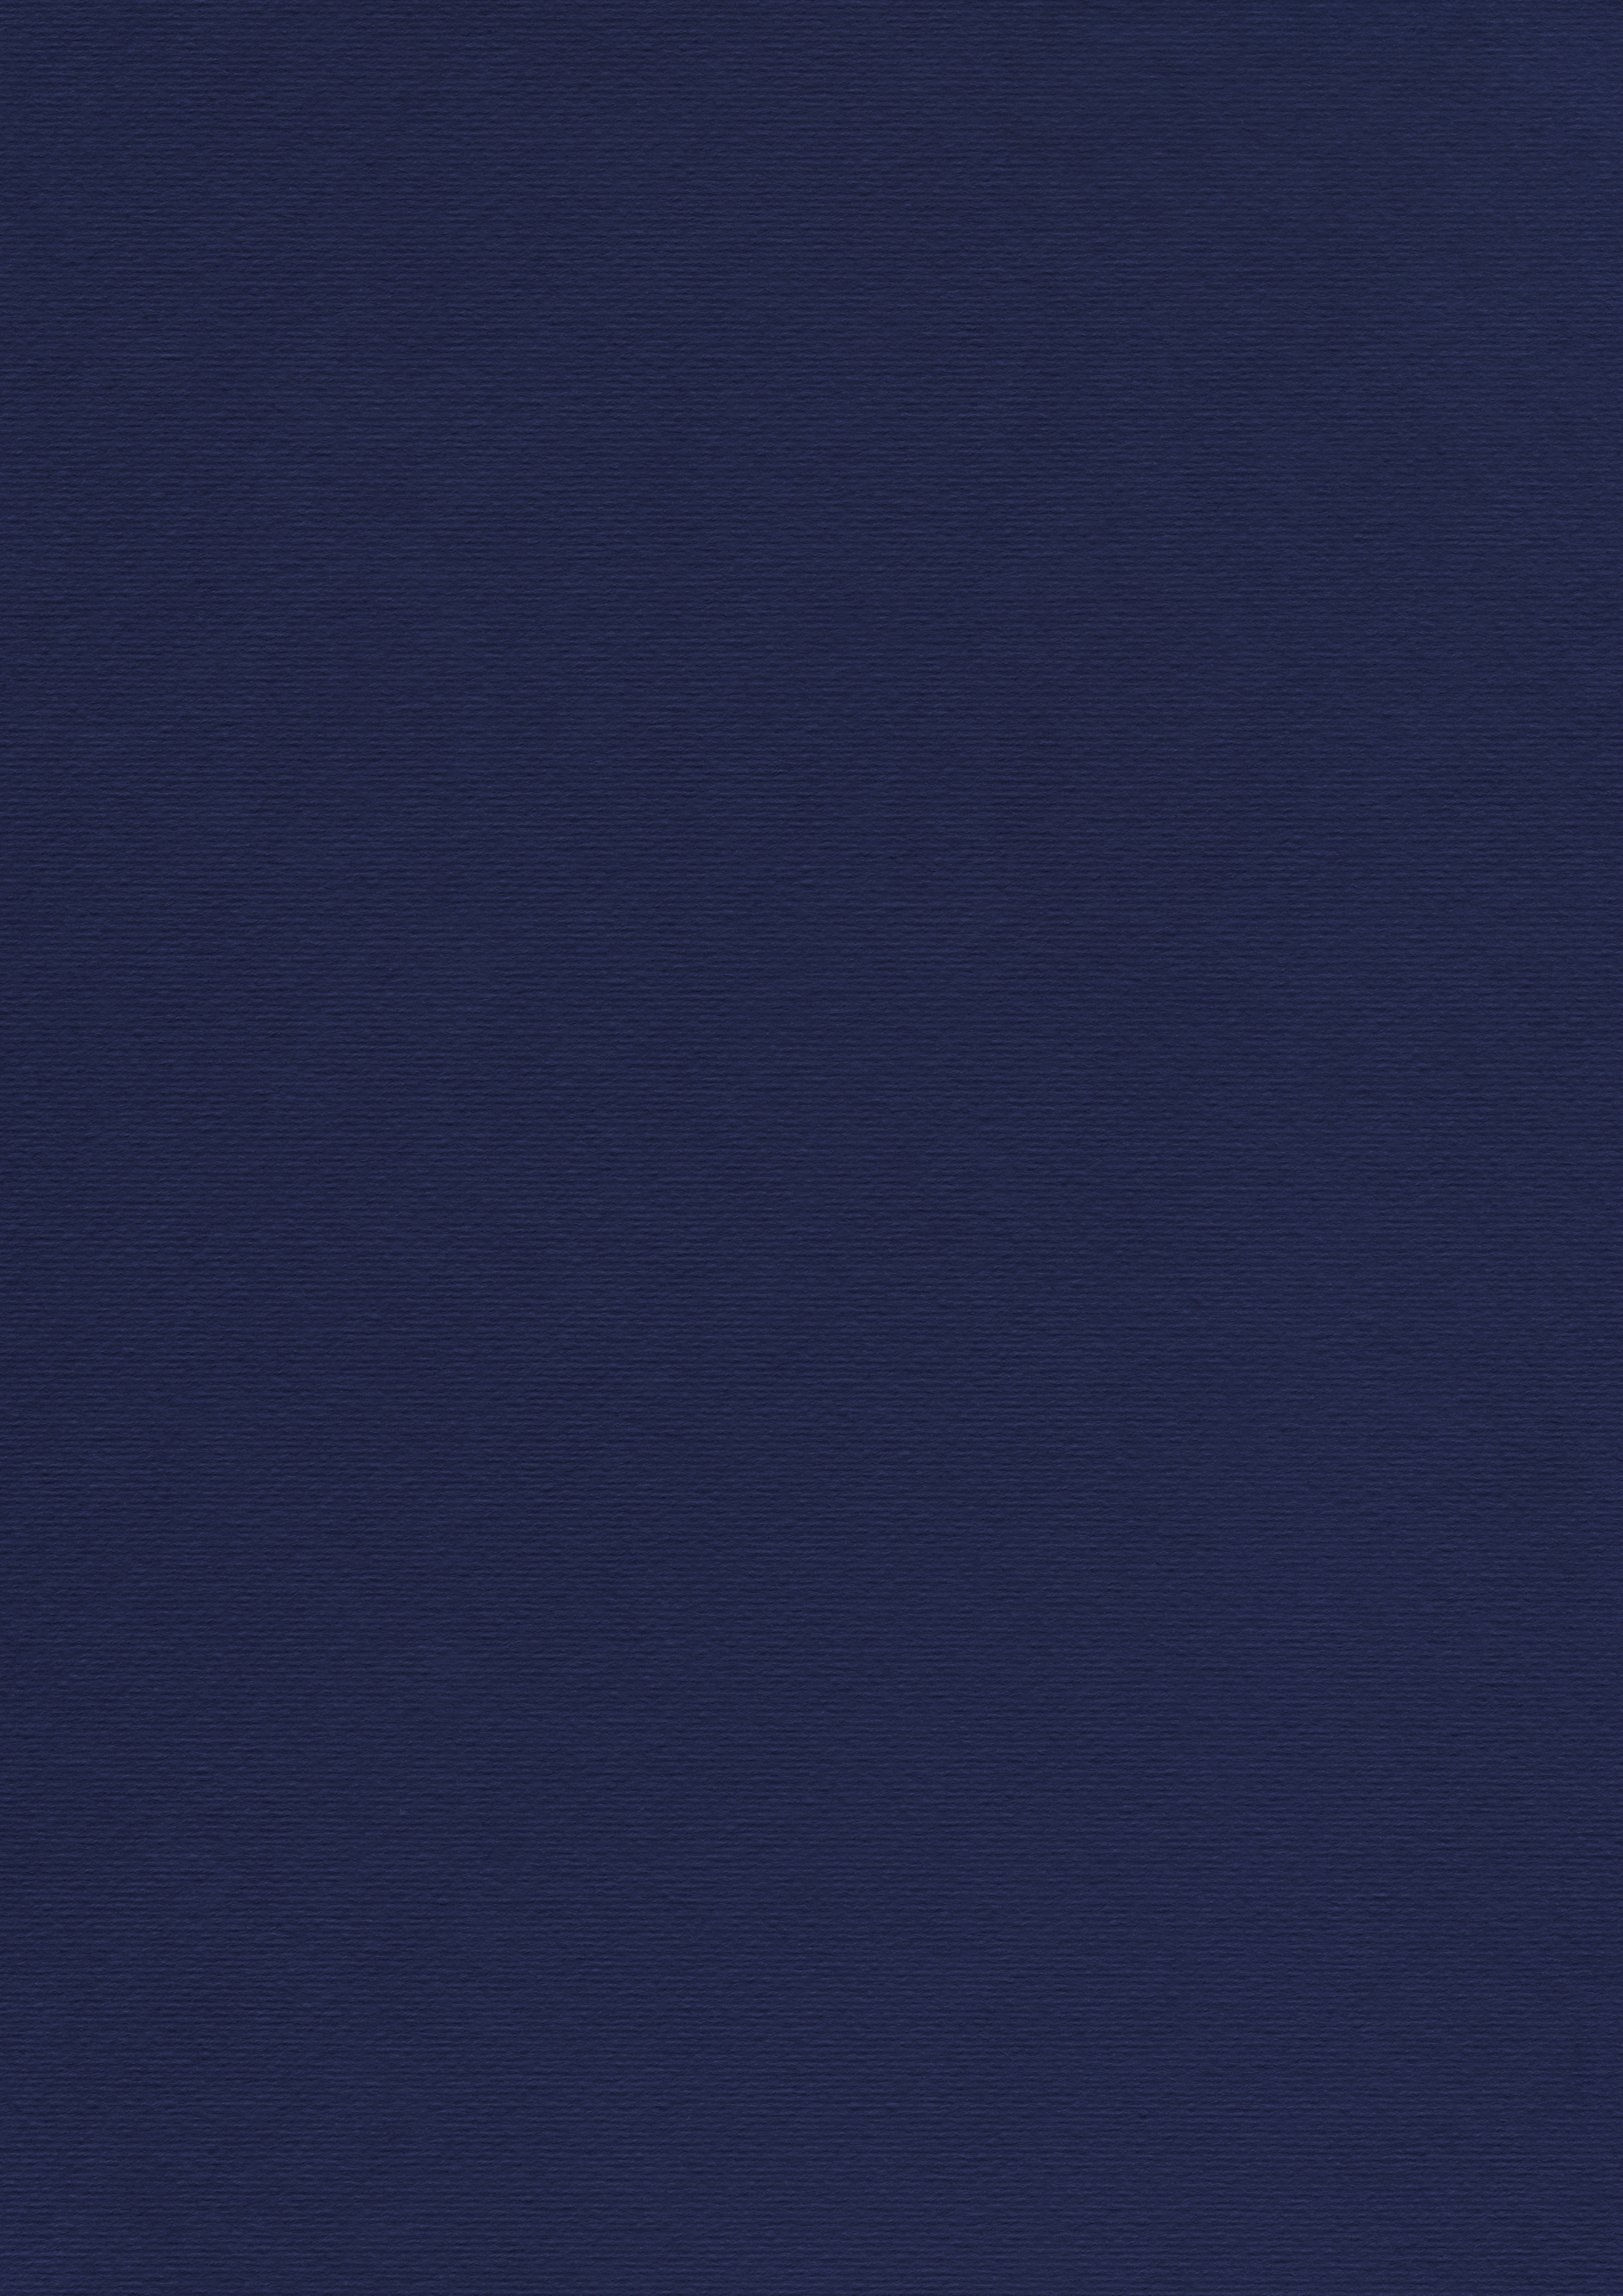 Navy Blue Striped Recycle Pastel Paper Grunge Texture